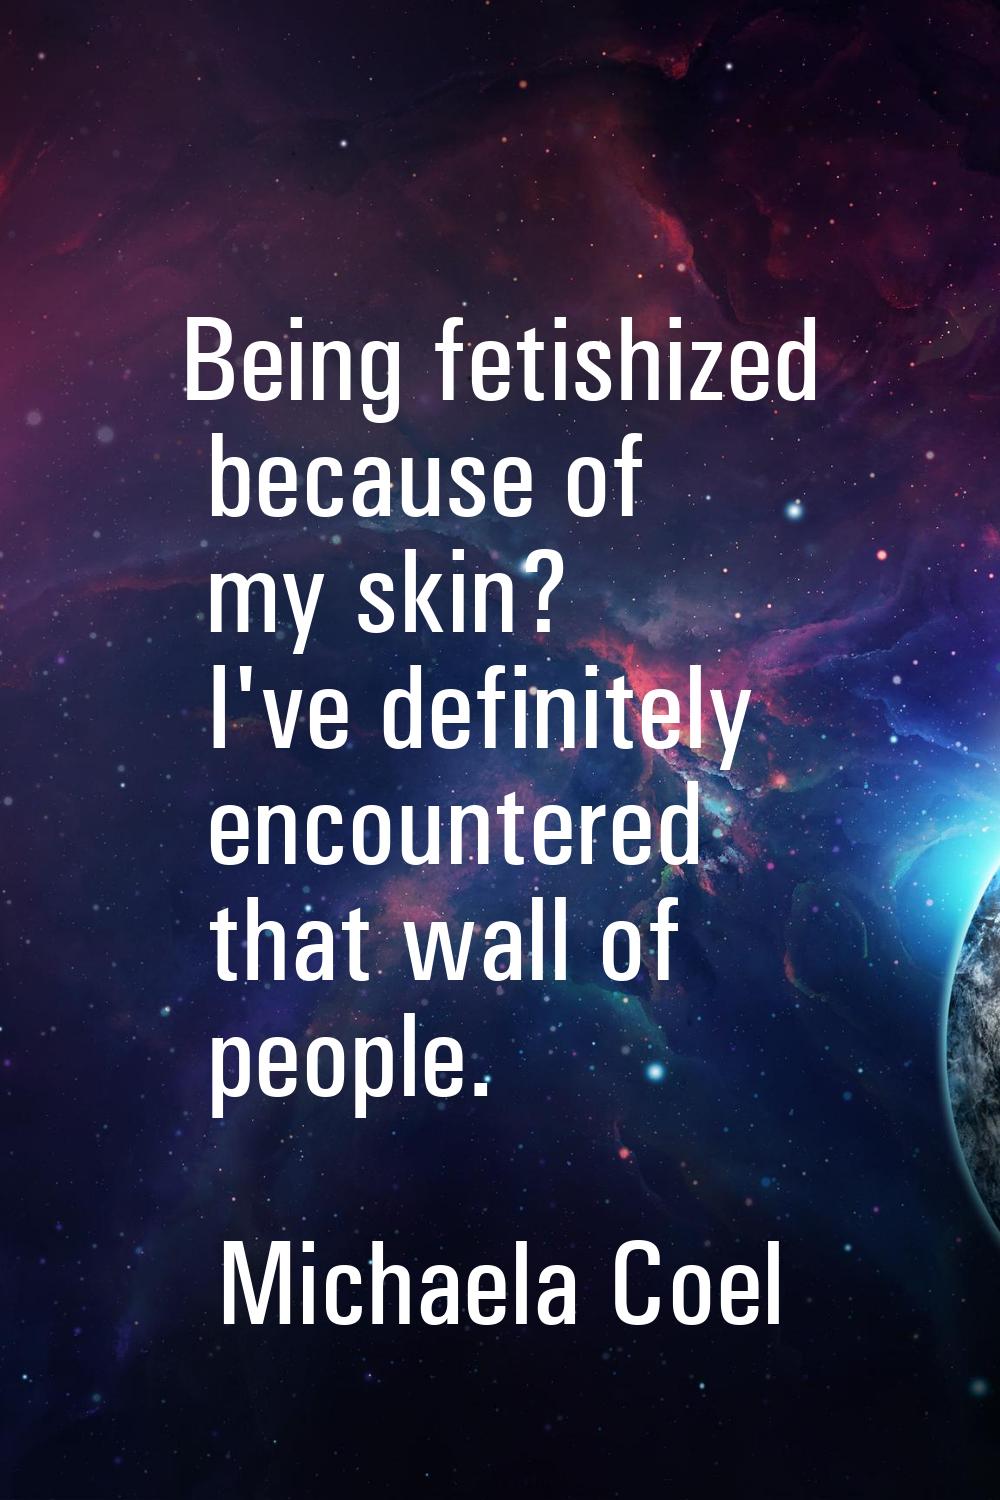 Being fetishized because of my skin? I've definitely encountered that wall of people.